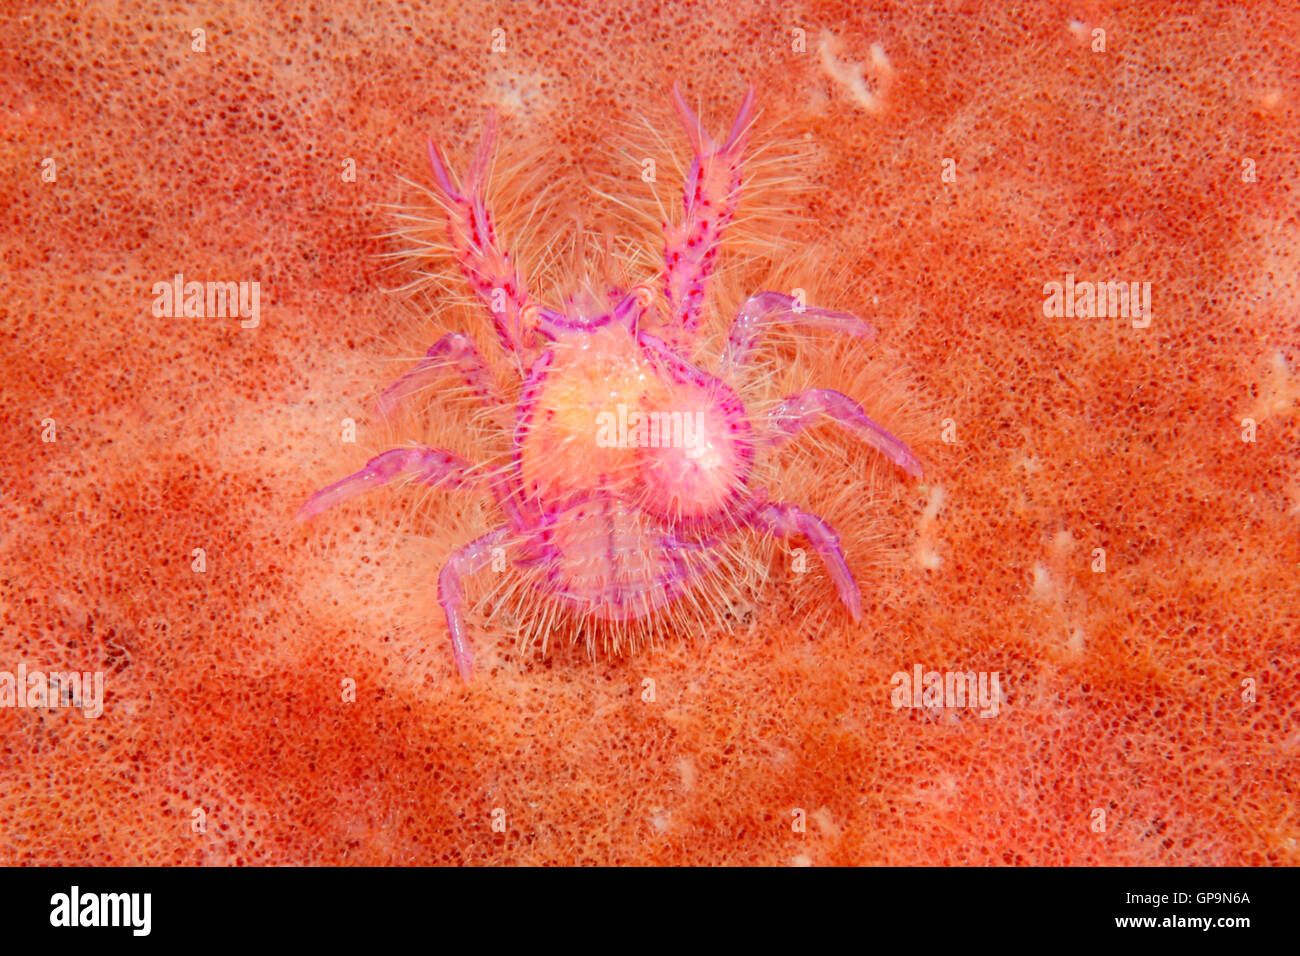 Hairy Squat Lobster, Lauriea siagiani, with an attached unidentified parasite and eggs.Tulamben, Bali, Indonesia. Stock Photo